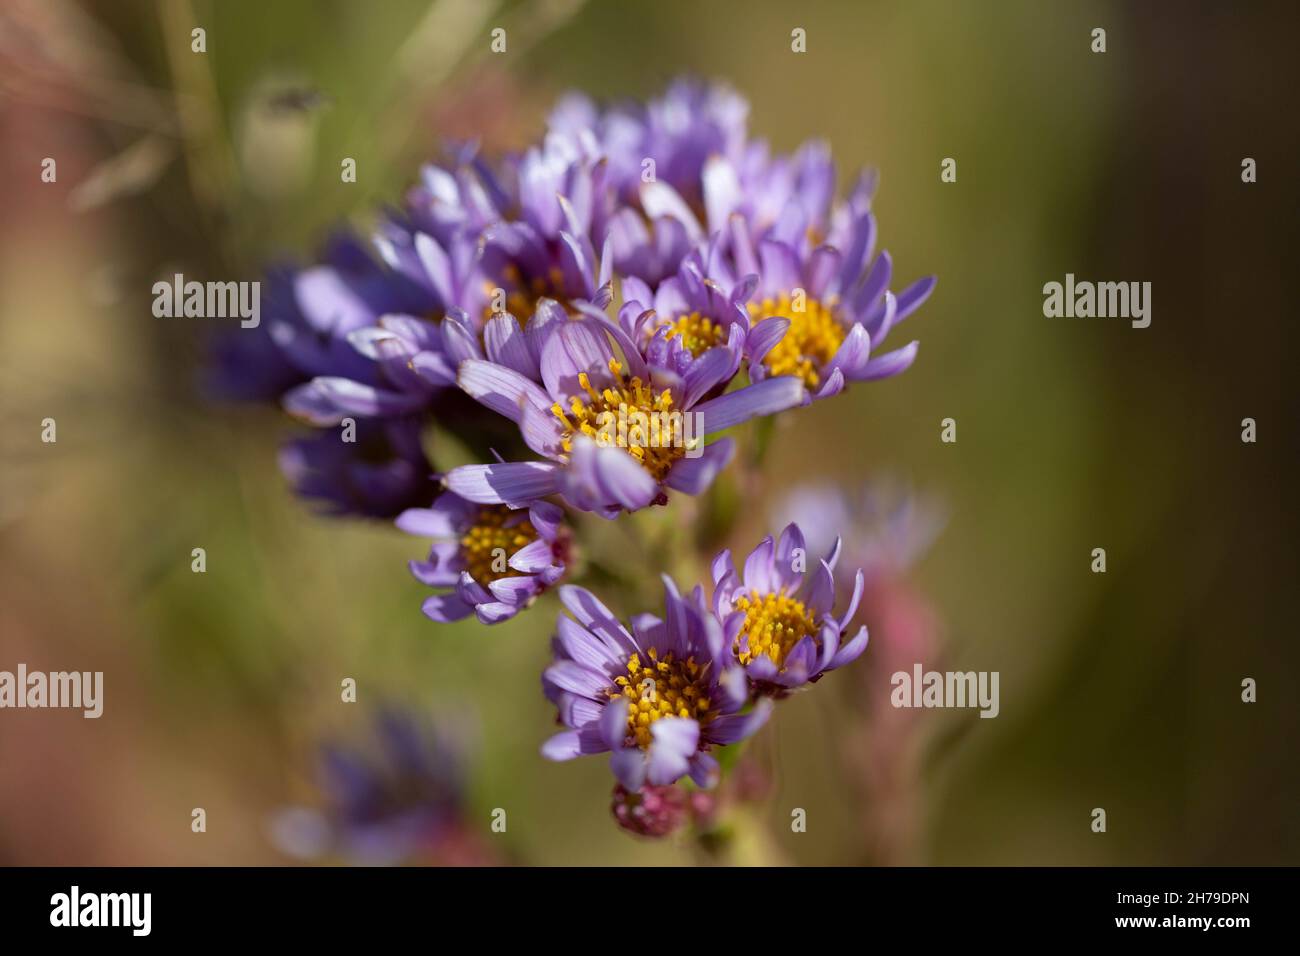 Aster flower in fall Stock Photo